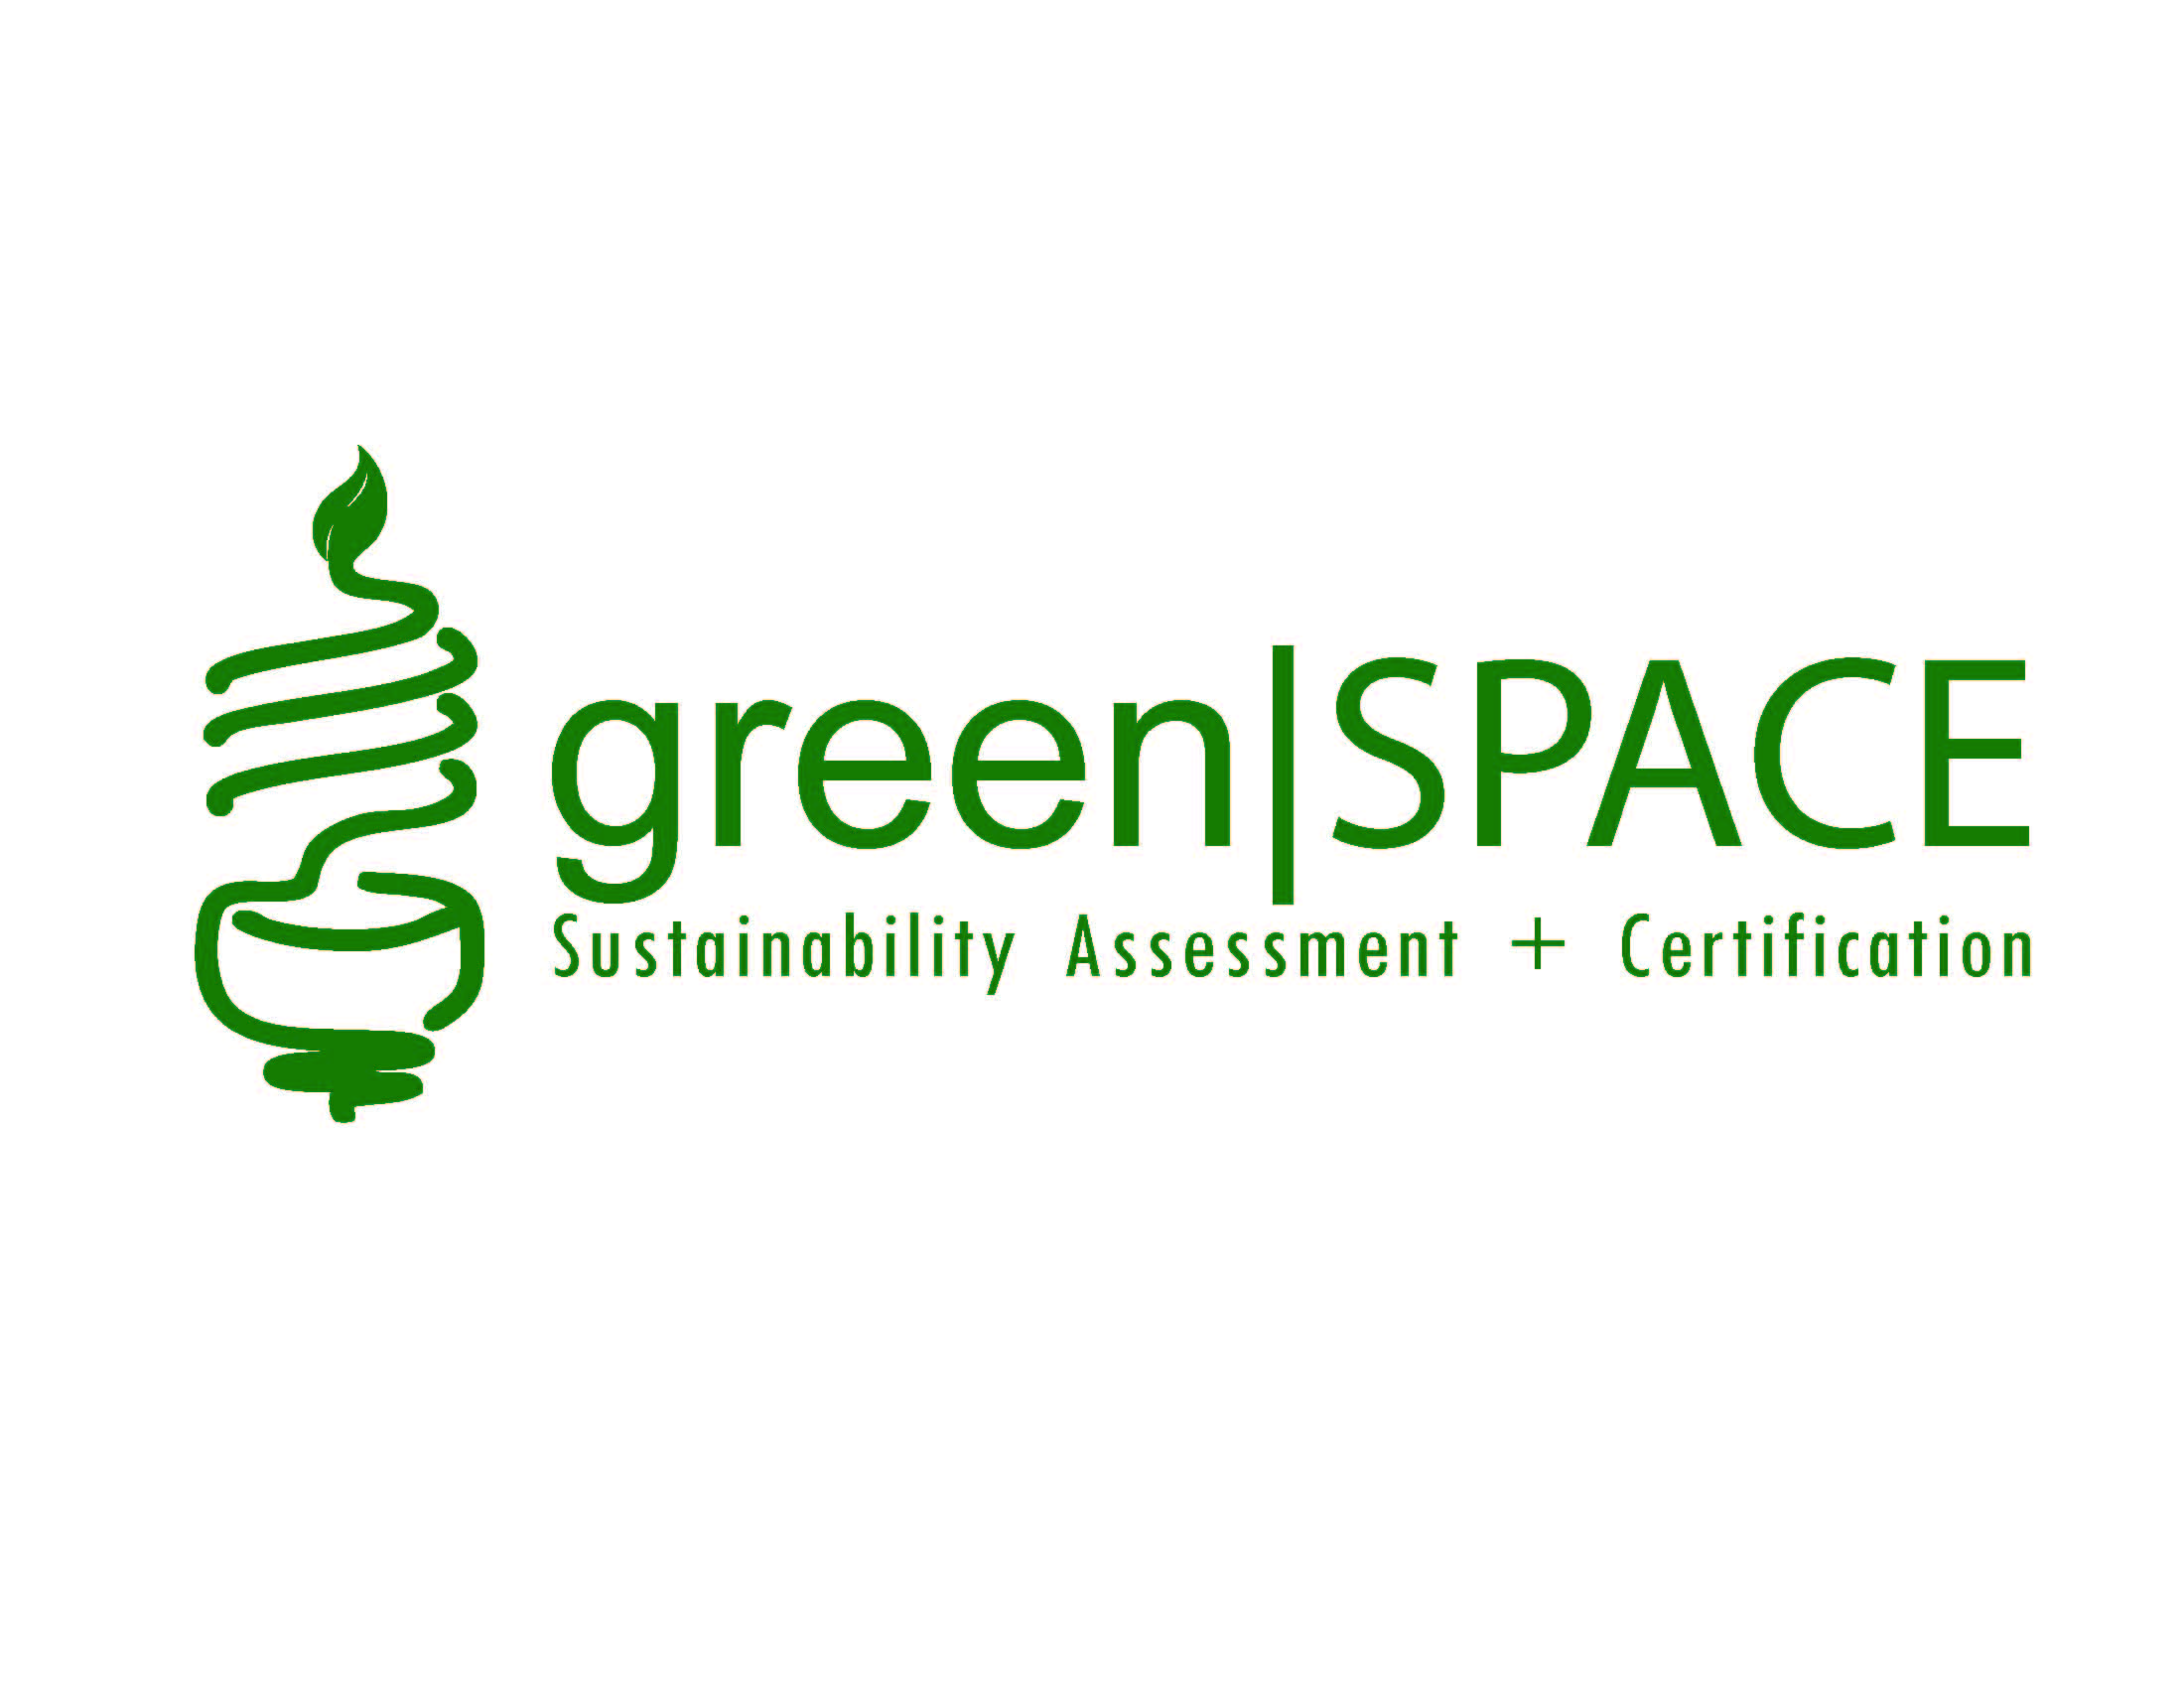 Green Space Logo - Resources